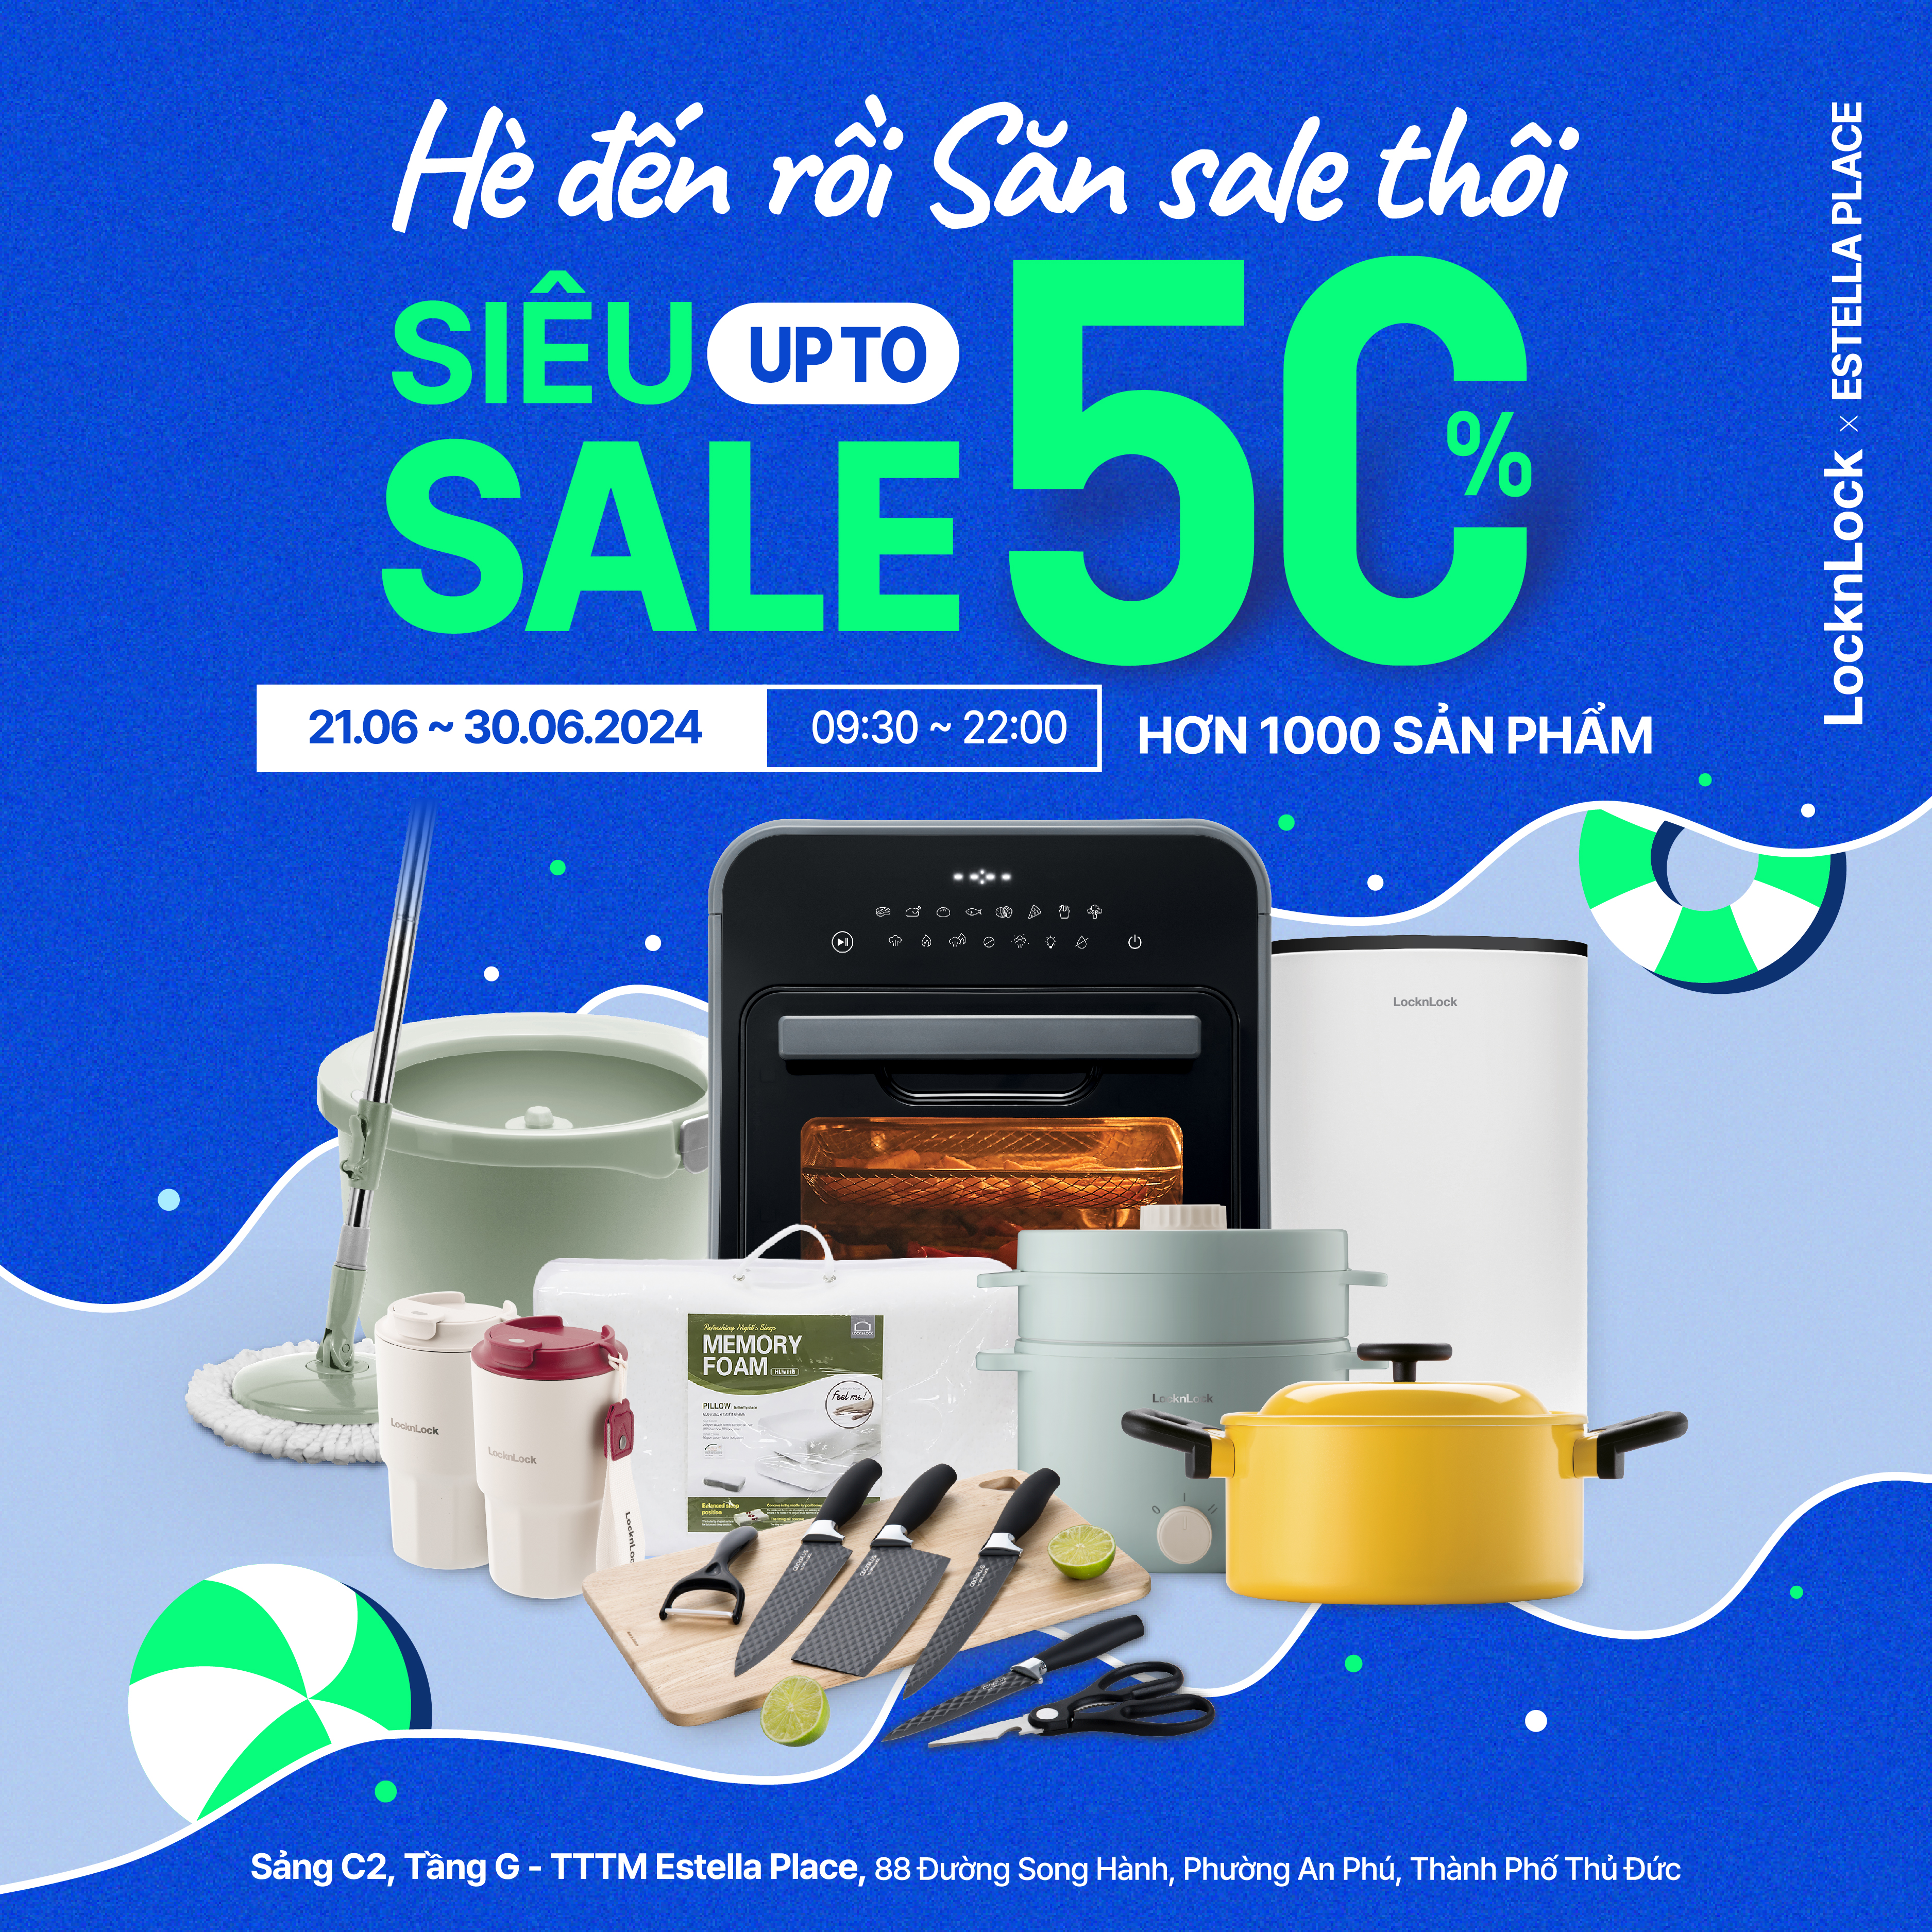 🥳SUMMER IS HERE, TIME FOR SHOPPING - SUPER SALE UP TO 50%